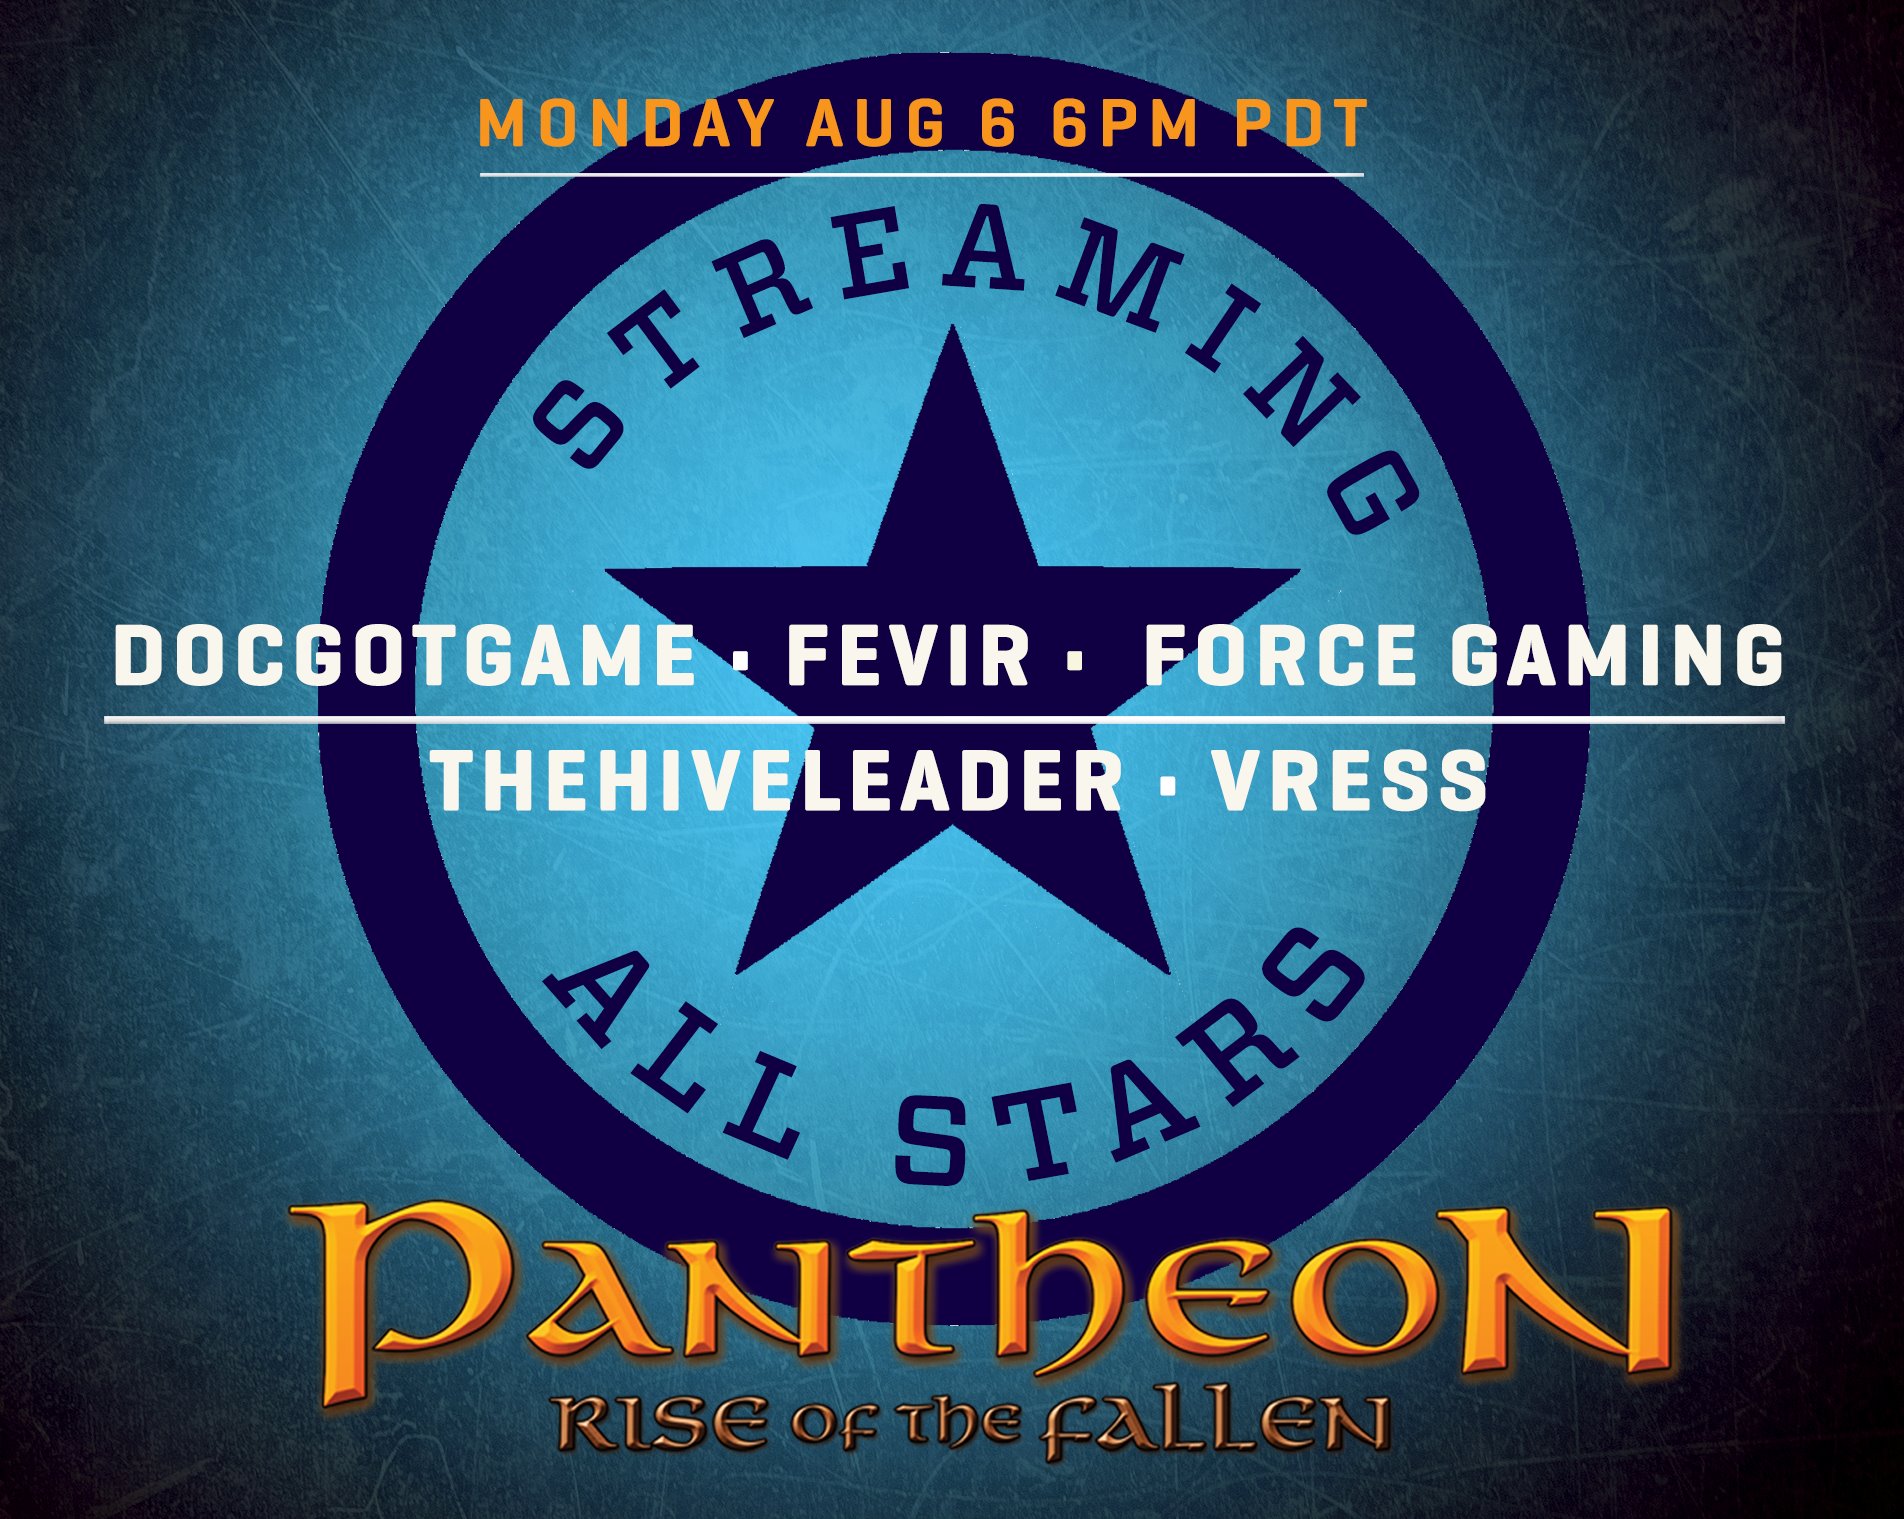 2018-Aug 2: promo for Pantheon gameplay video with streamers Docgotgame, Fevir, Force Gaming, TheHiveLeader, and Vress.